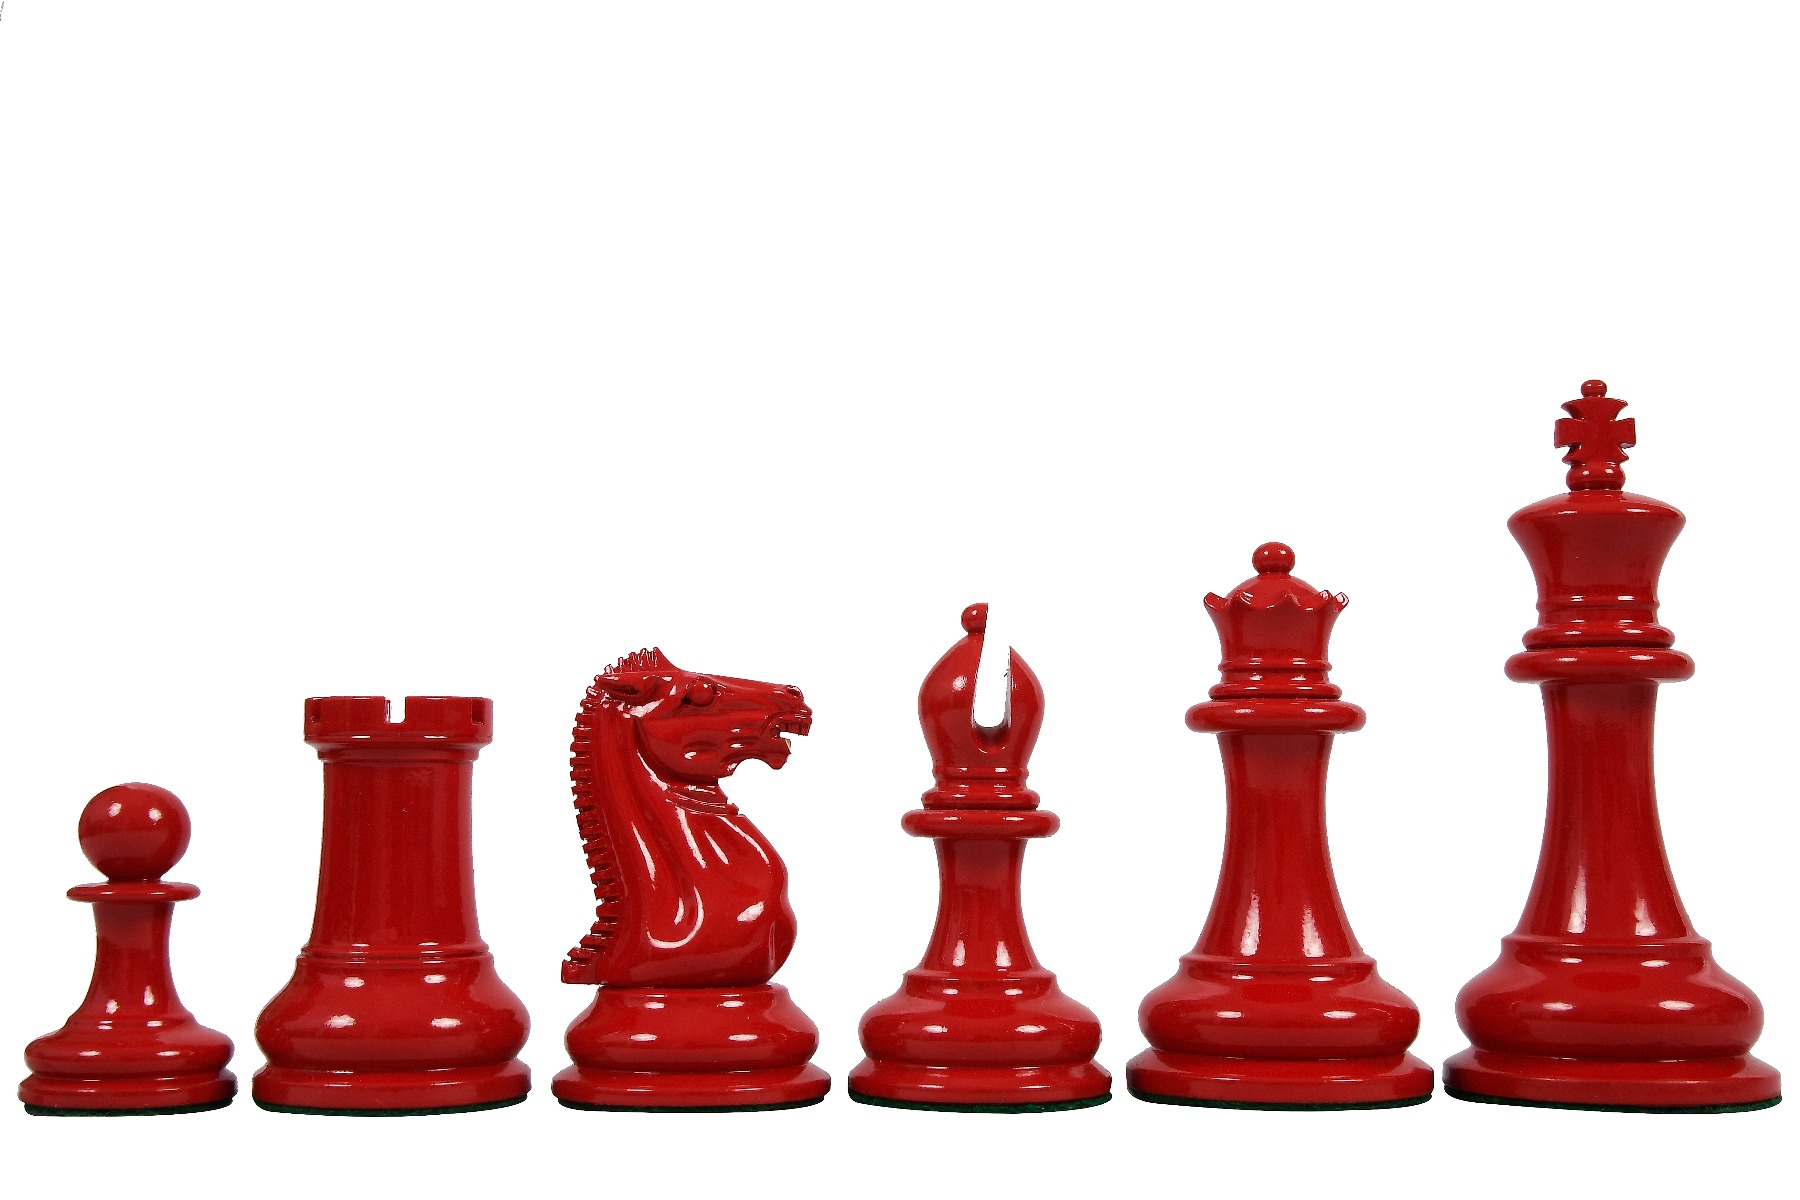 4 Queens Staunton Single Weight Chess Pieces Full Set of 34 White & Red 